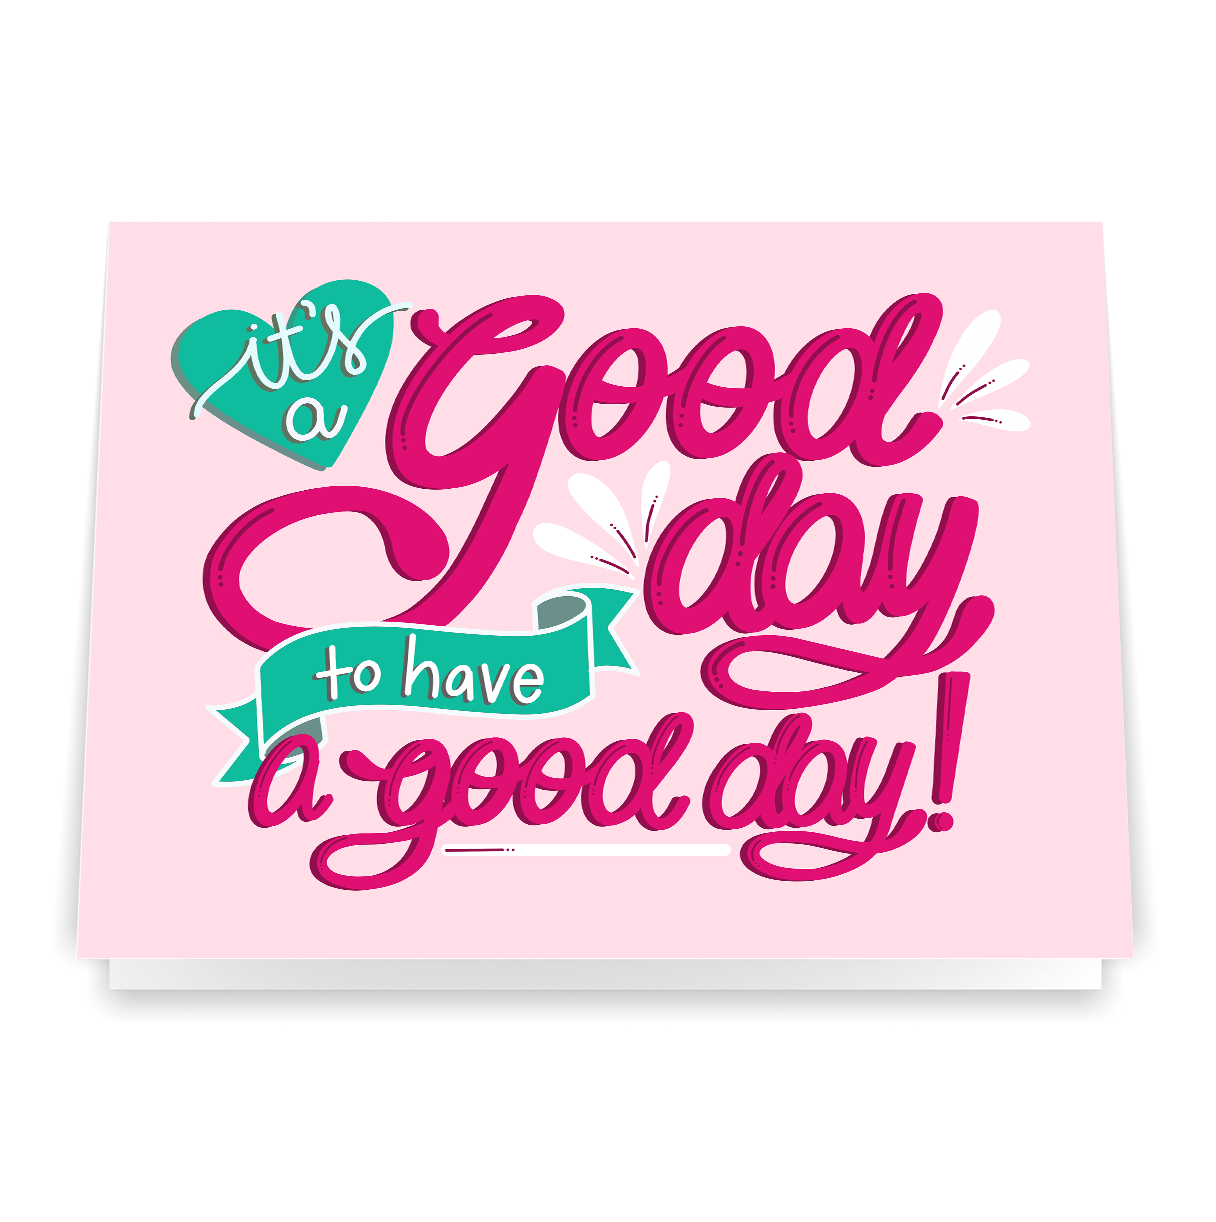 It's a Good Day to Have a Good Day - Greeting Card